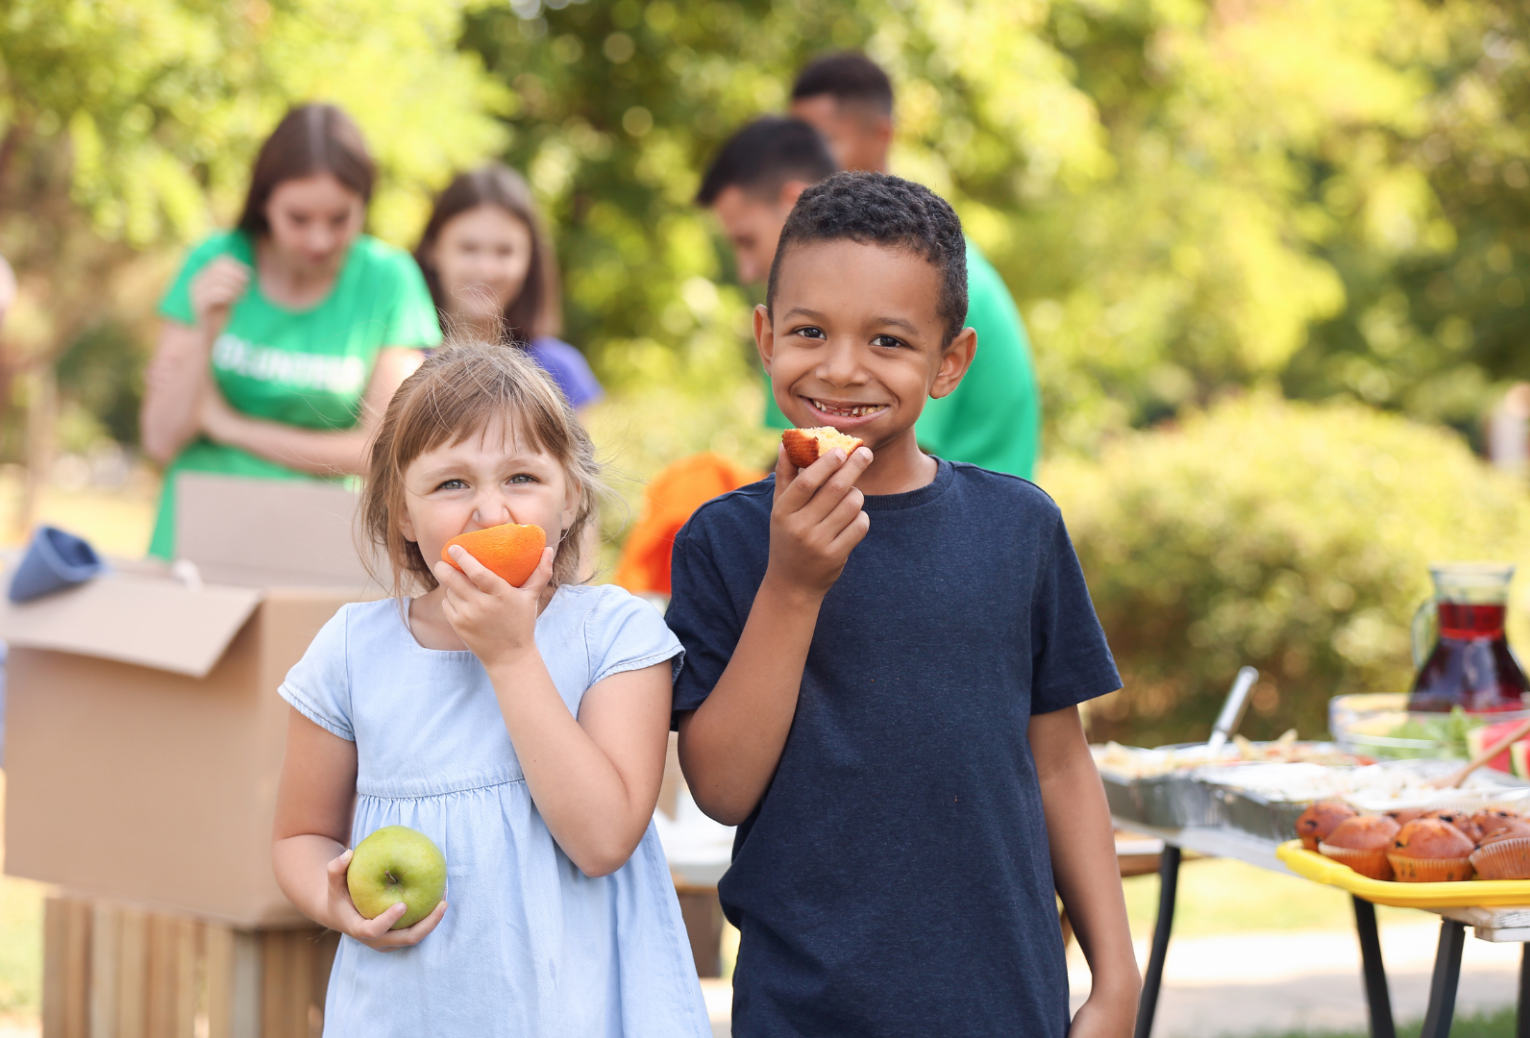 A small white girl and a small Black boy eating apples at a cookout with adults in the background